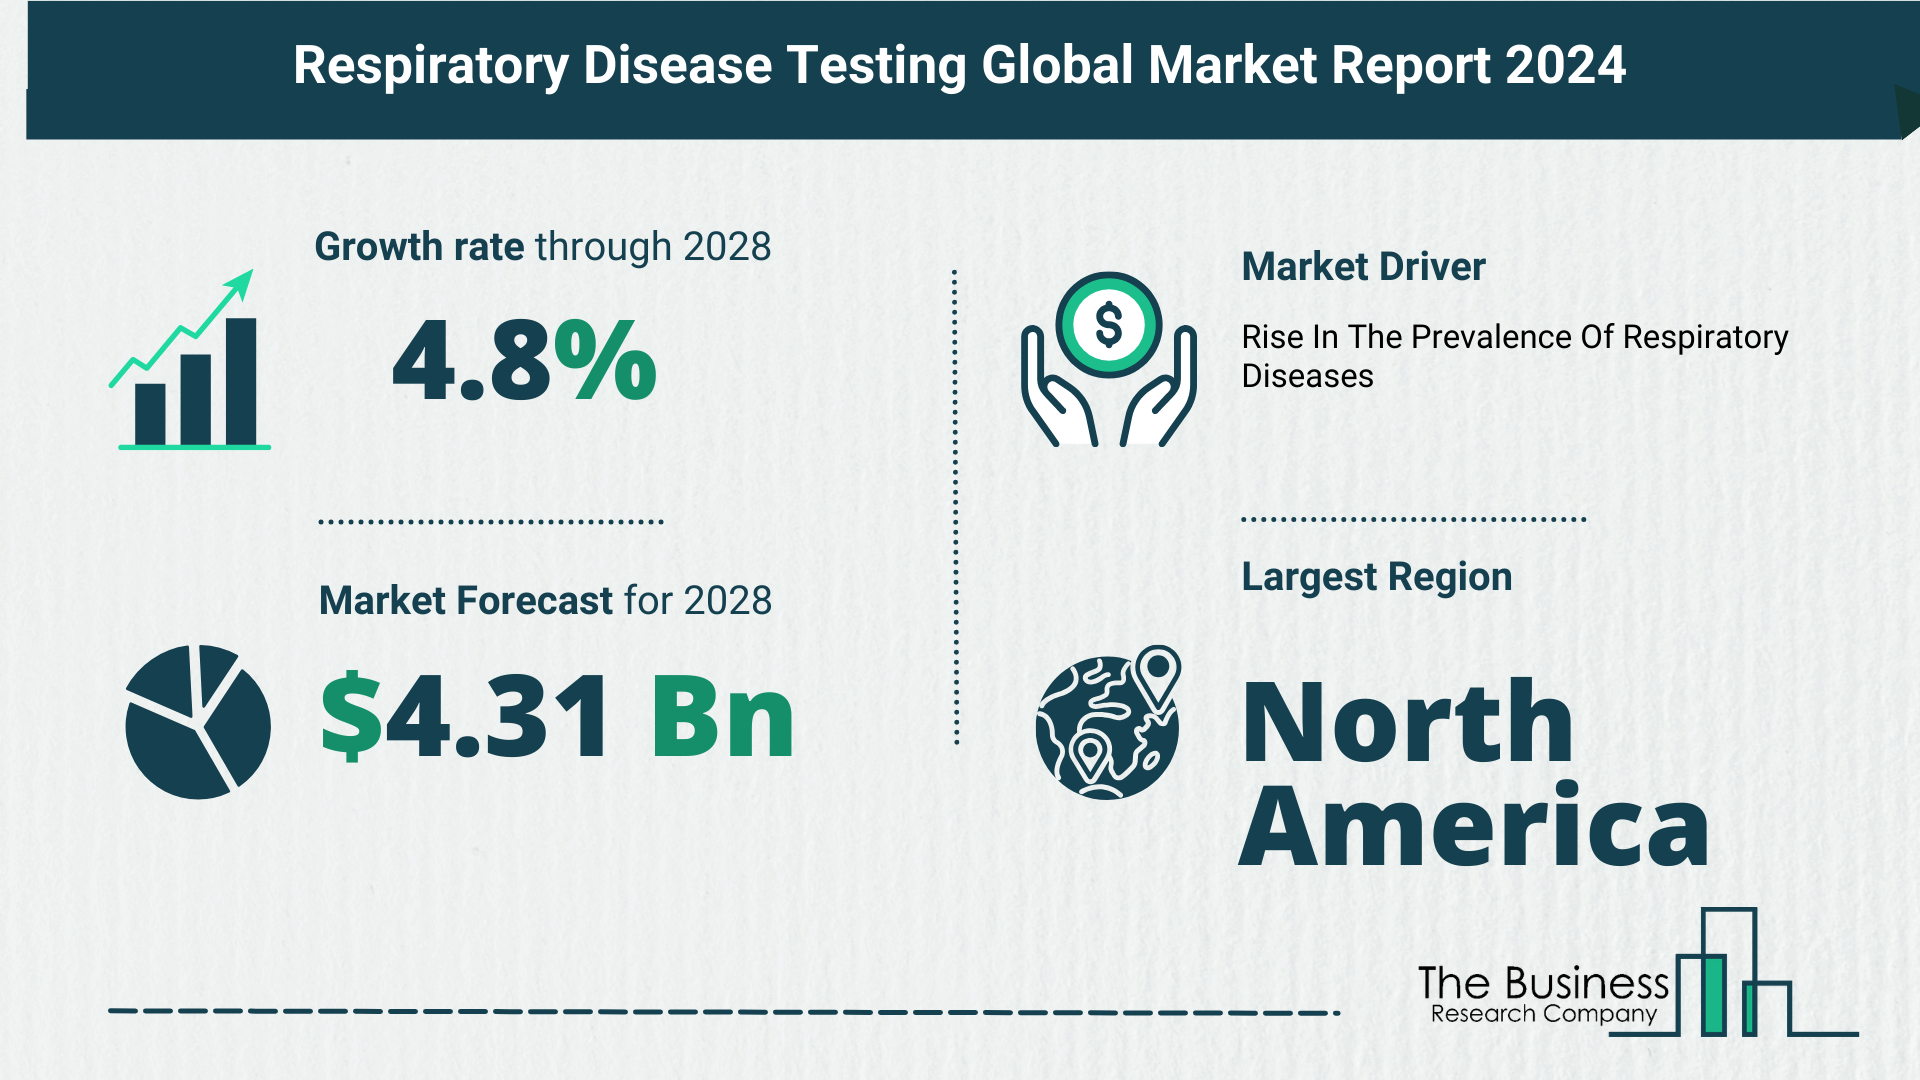 Top 5 Insights From The Respiratory Disease Testing Market Report 2024